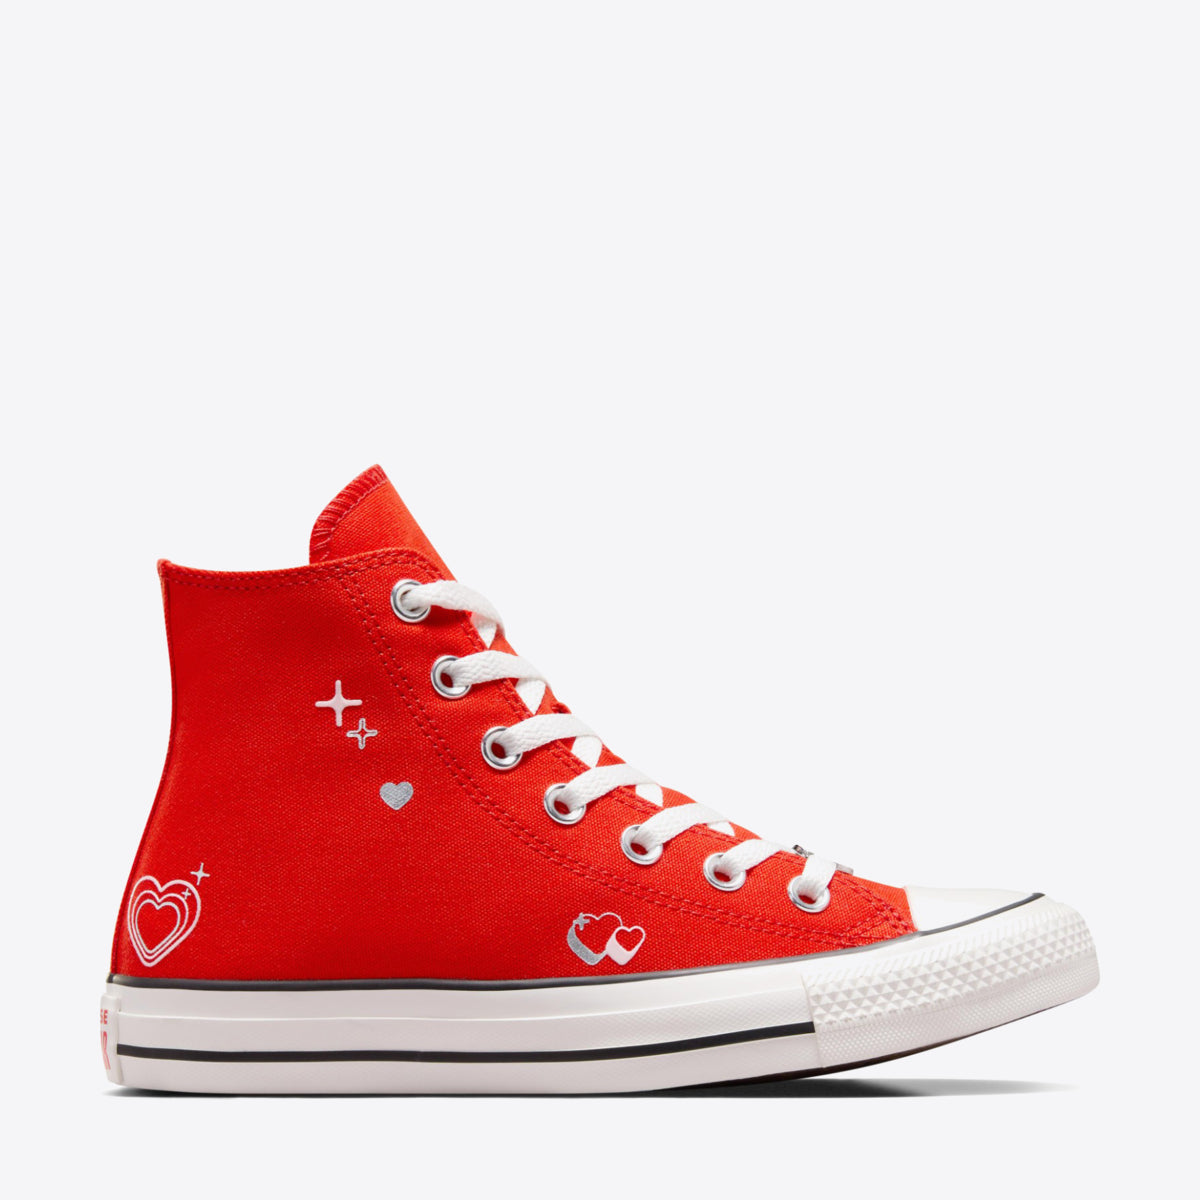 CONVERSE Chuck Taylor All Star BEMY2K High Fever Dream/Vintage White - Image 10